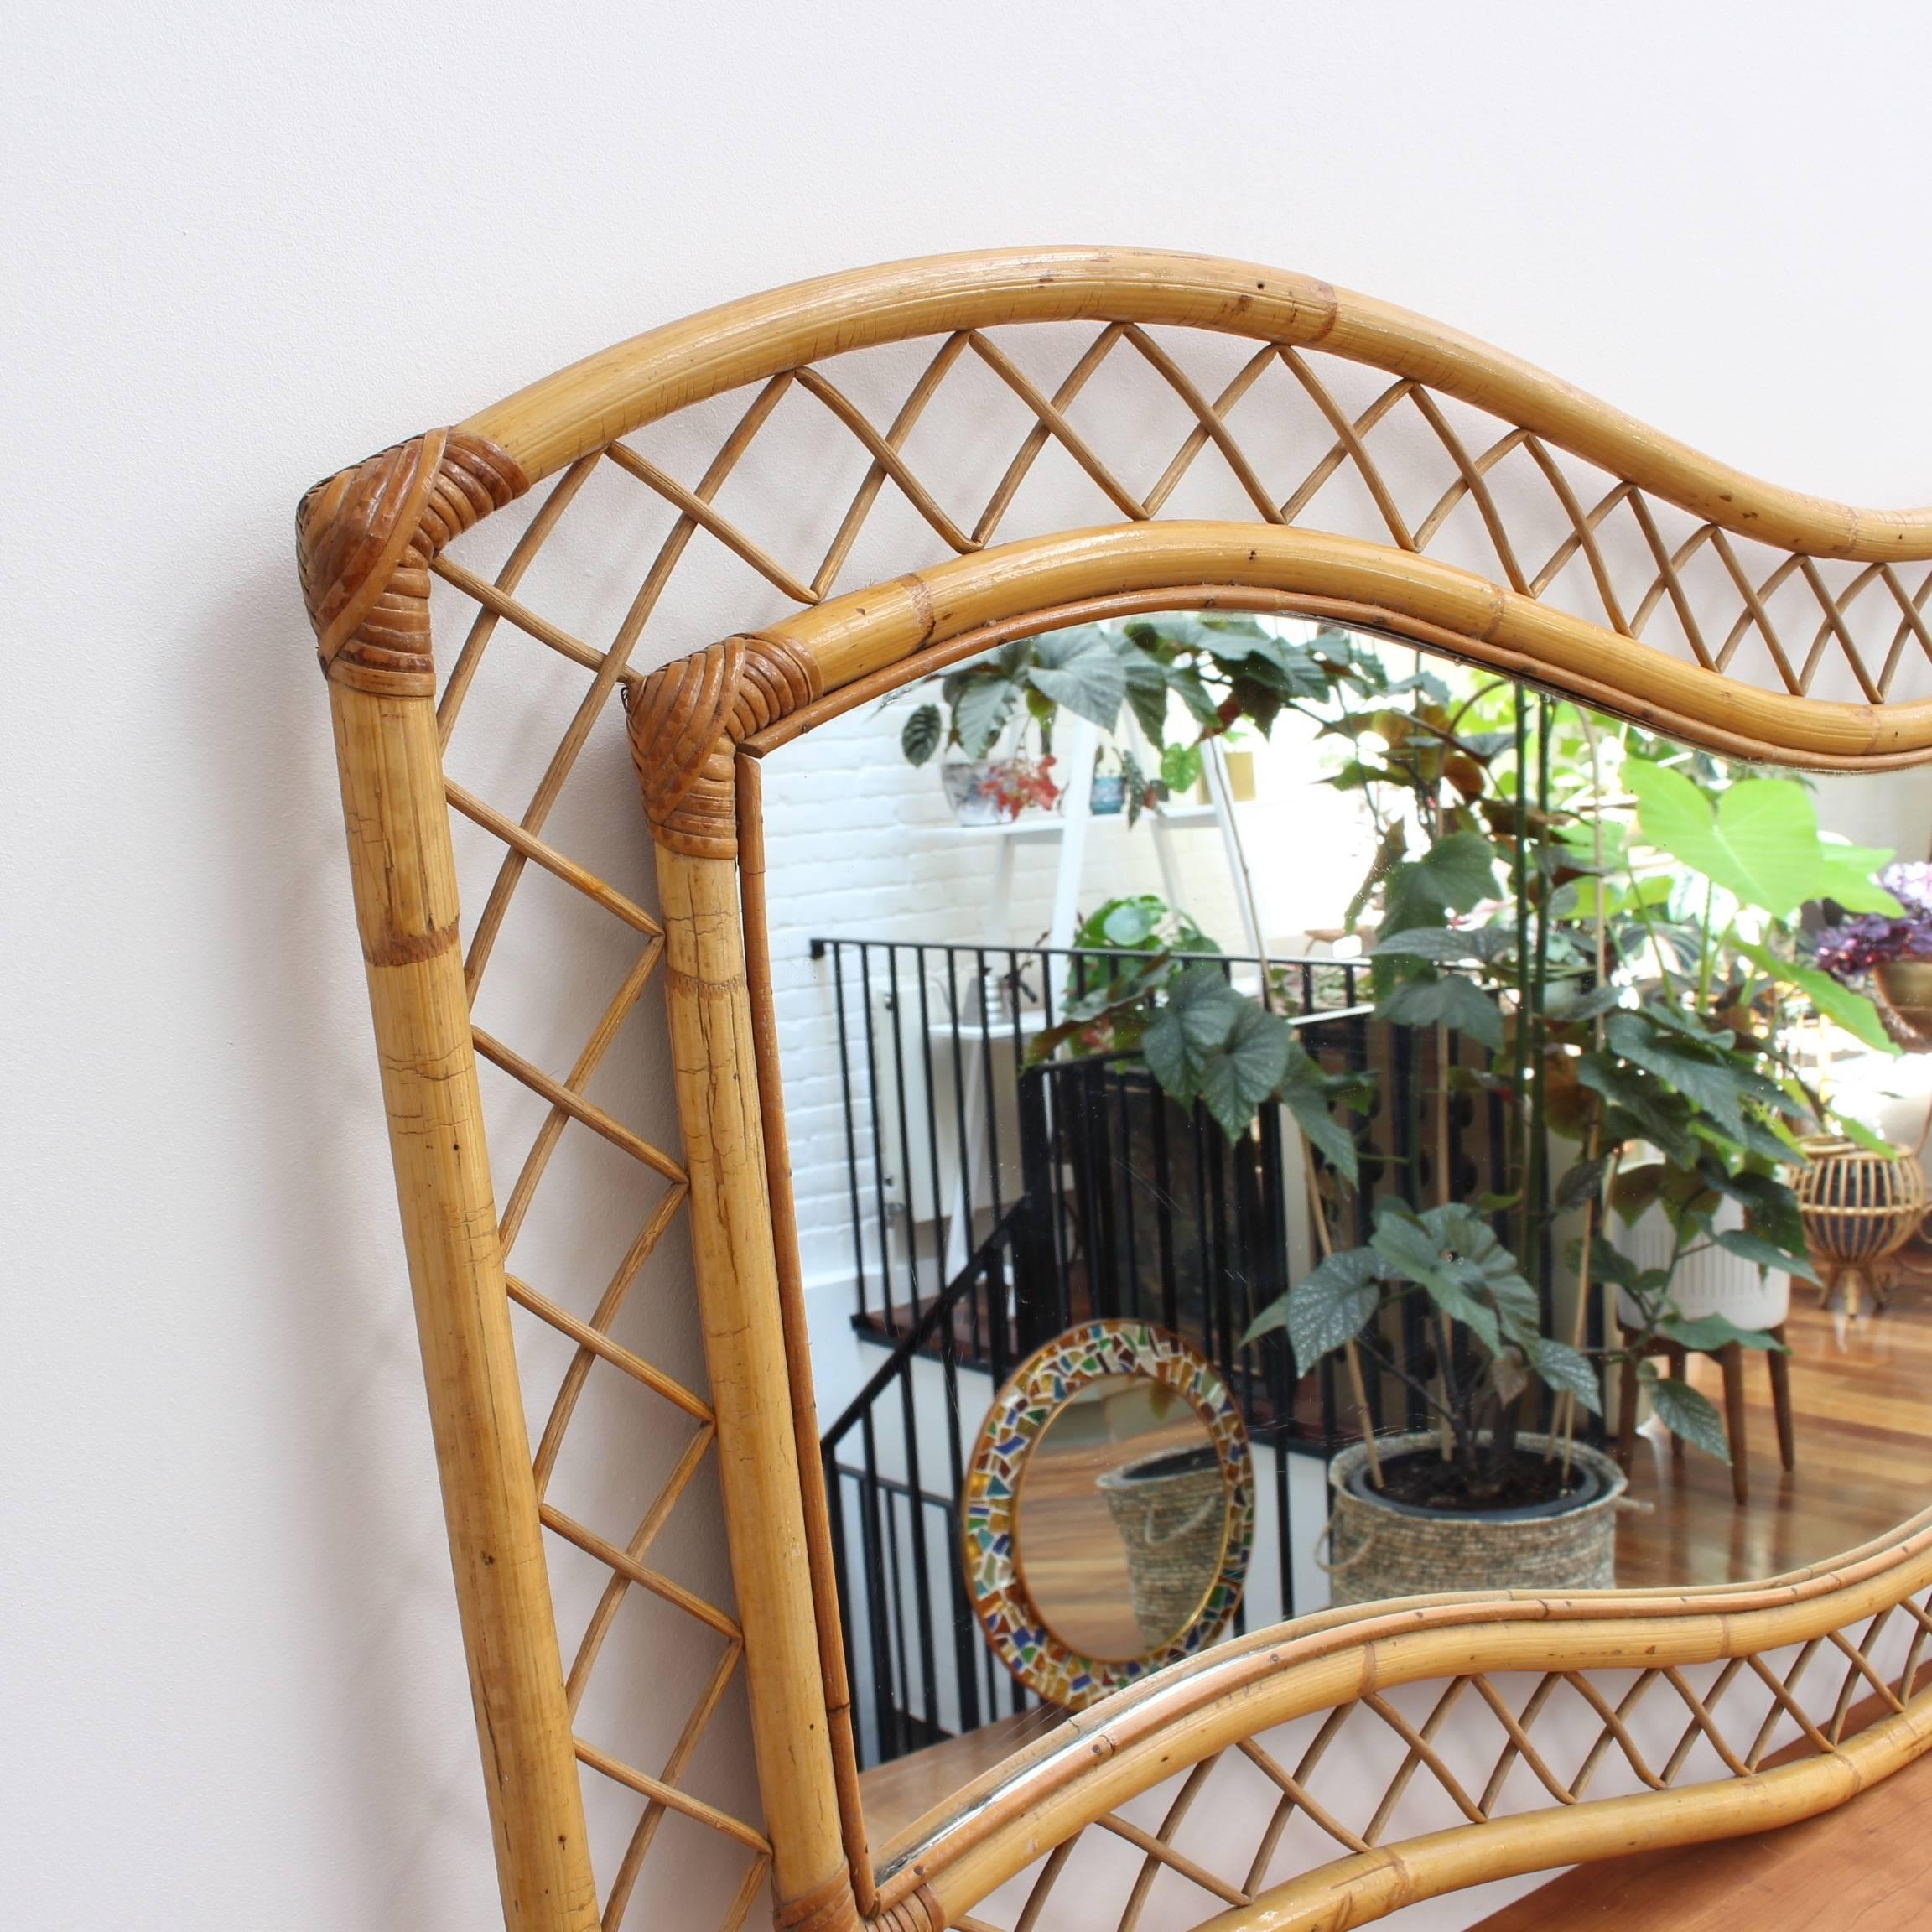 Mid-20th Century French Bamboo and Rattan Mirror, circa 1950s For Sale